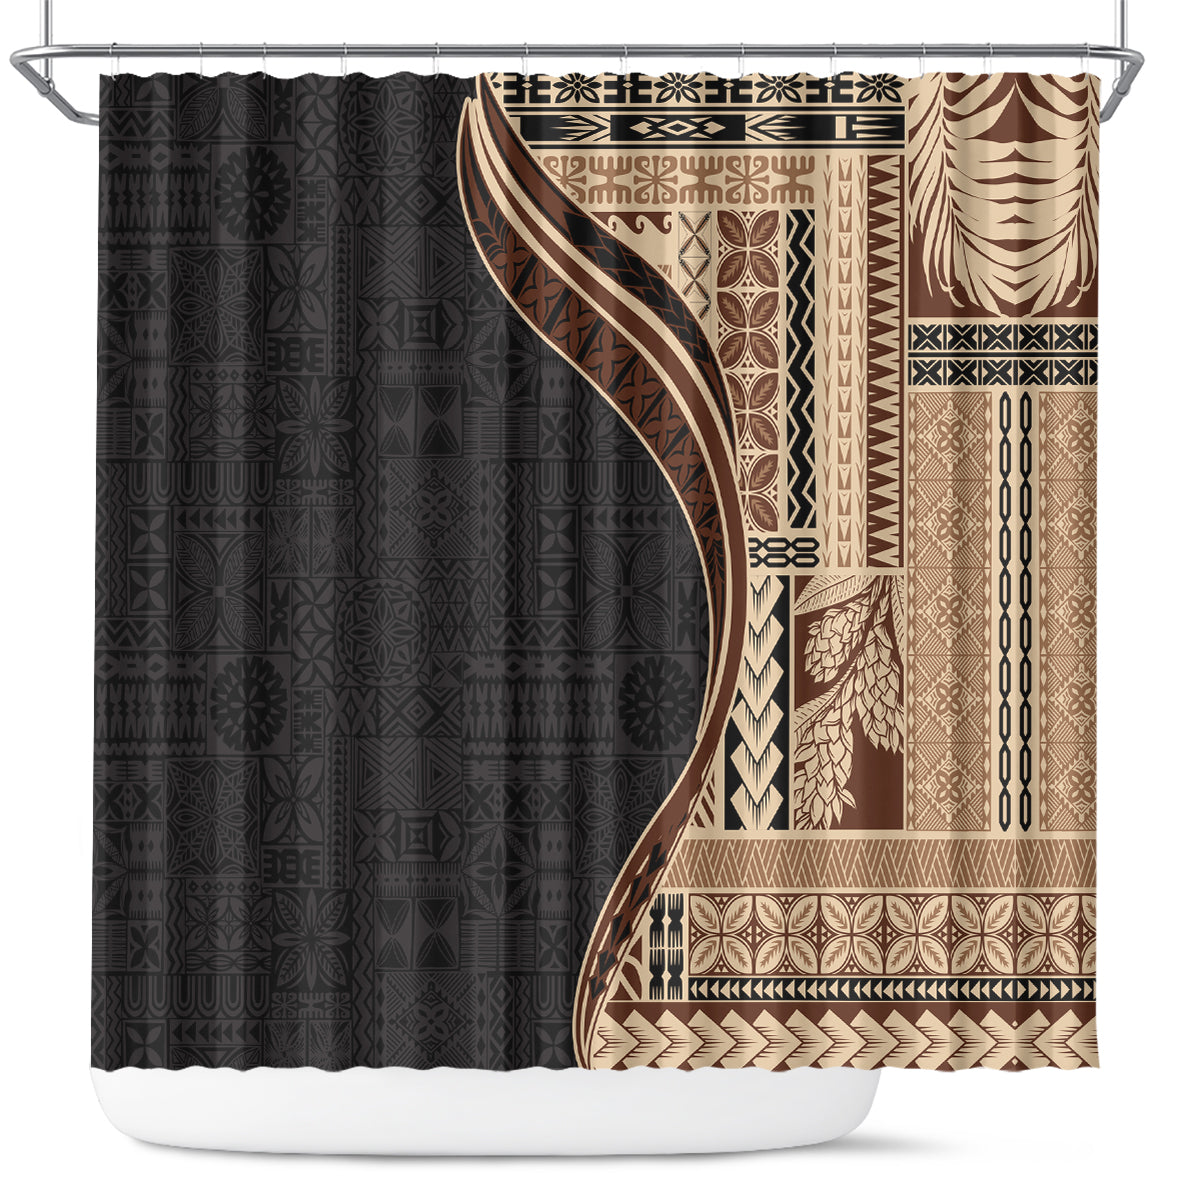 Samoa Siapo Motif and Tapa Pattern Half Style Shower Curtain Beige Color